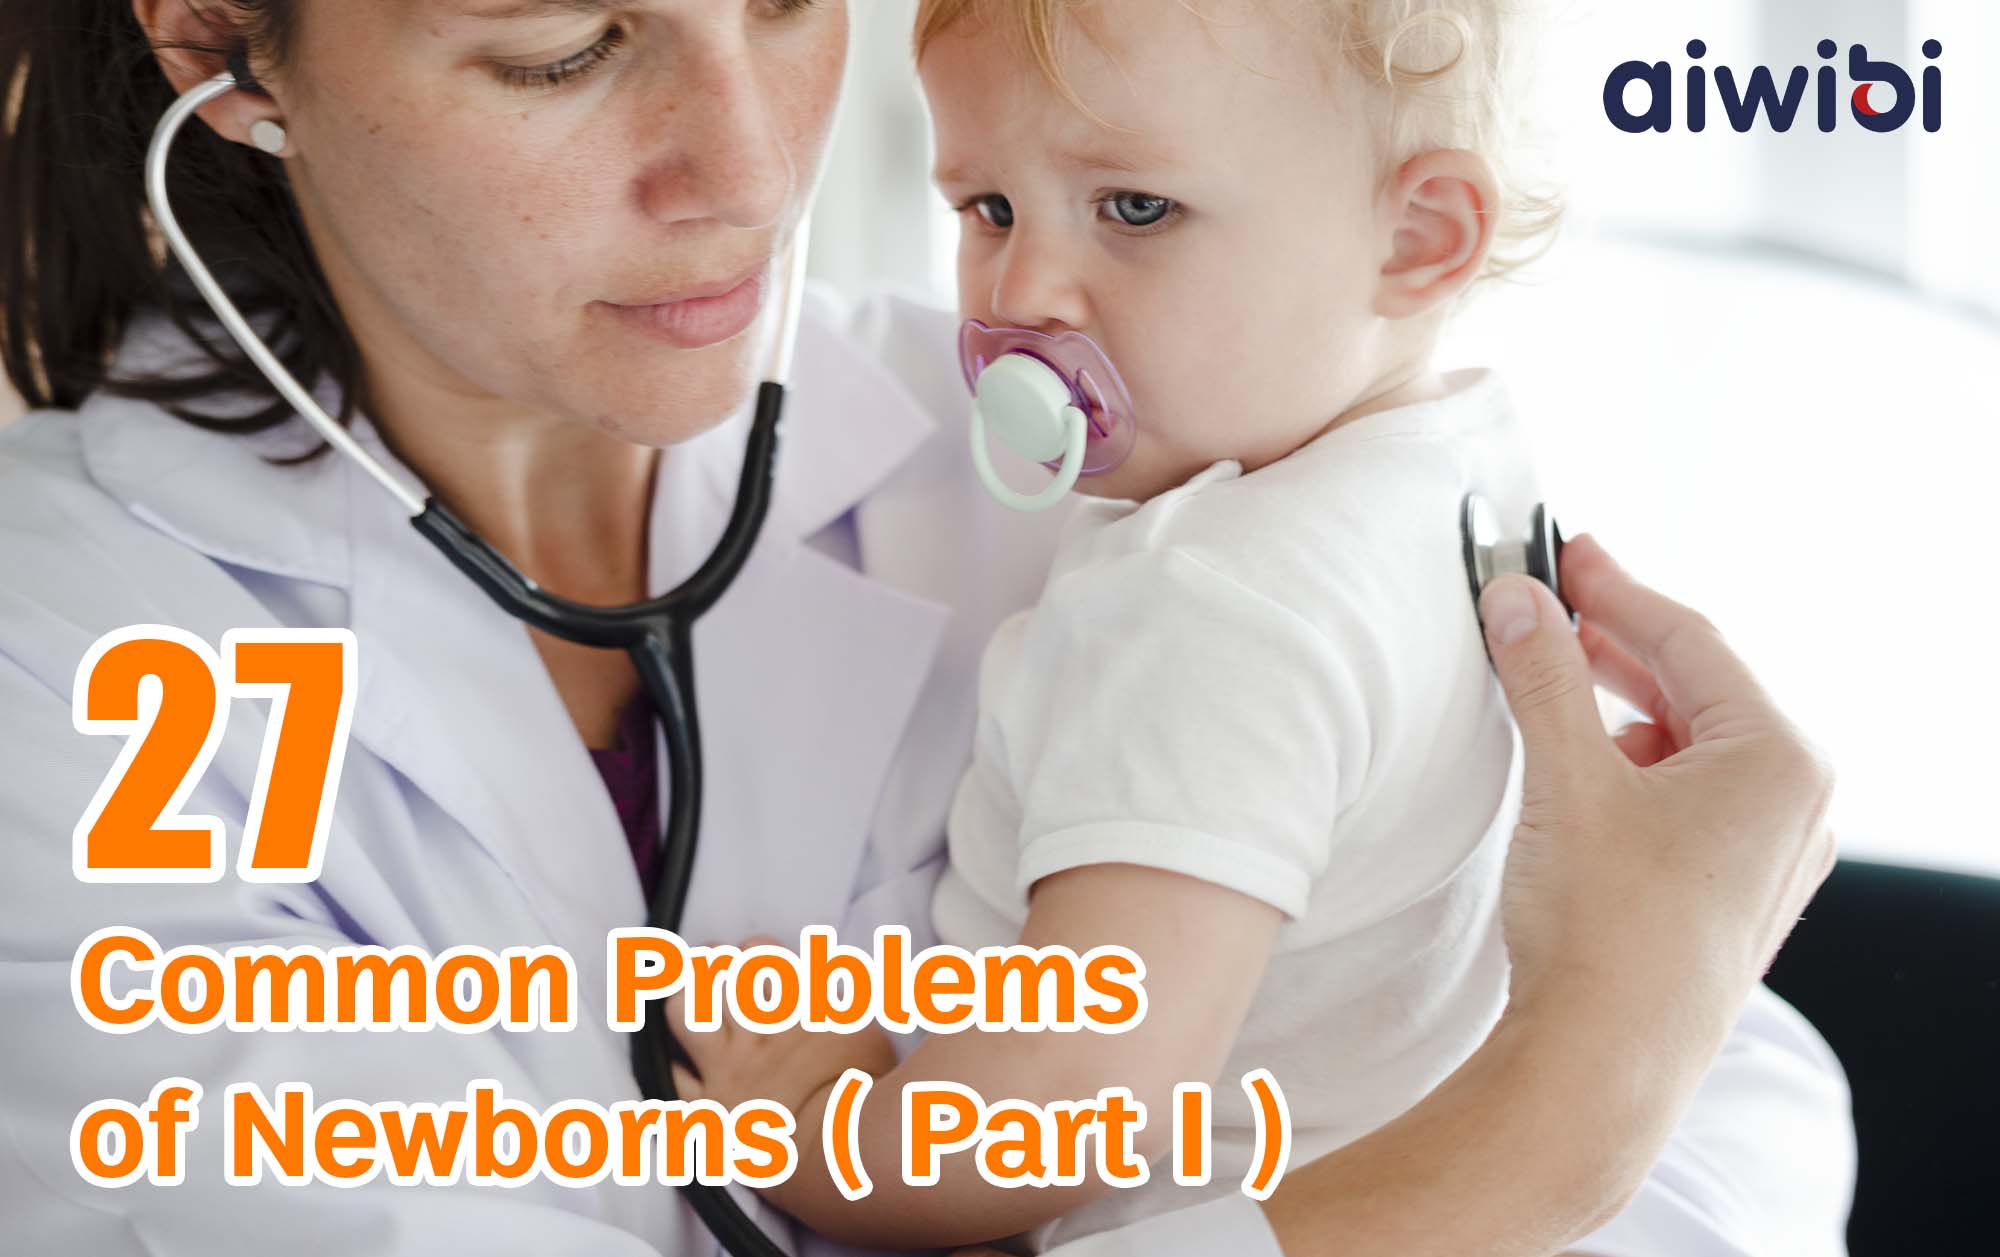 Parents Must Know How to Deal With the 27 Common Problems of Newborns（Part I）